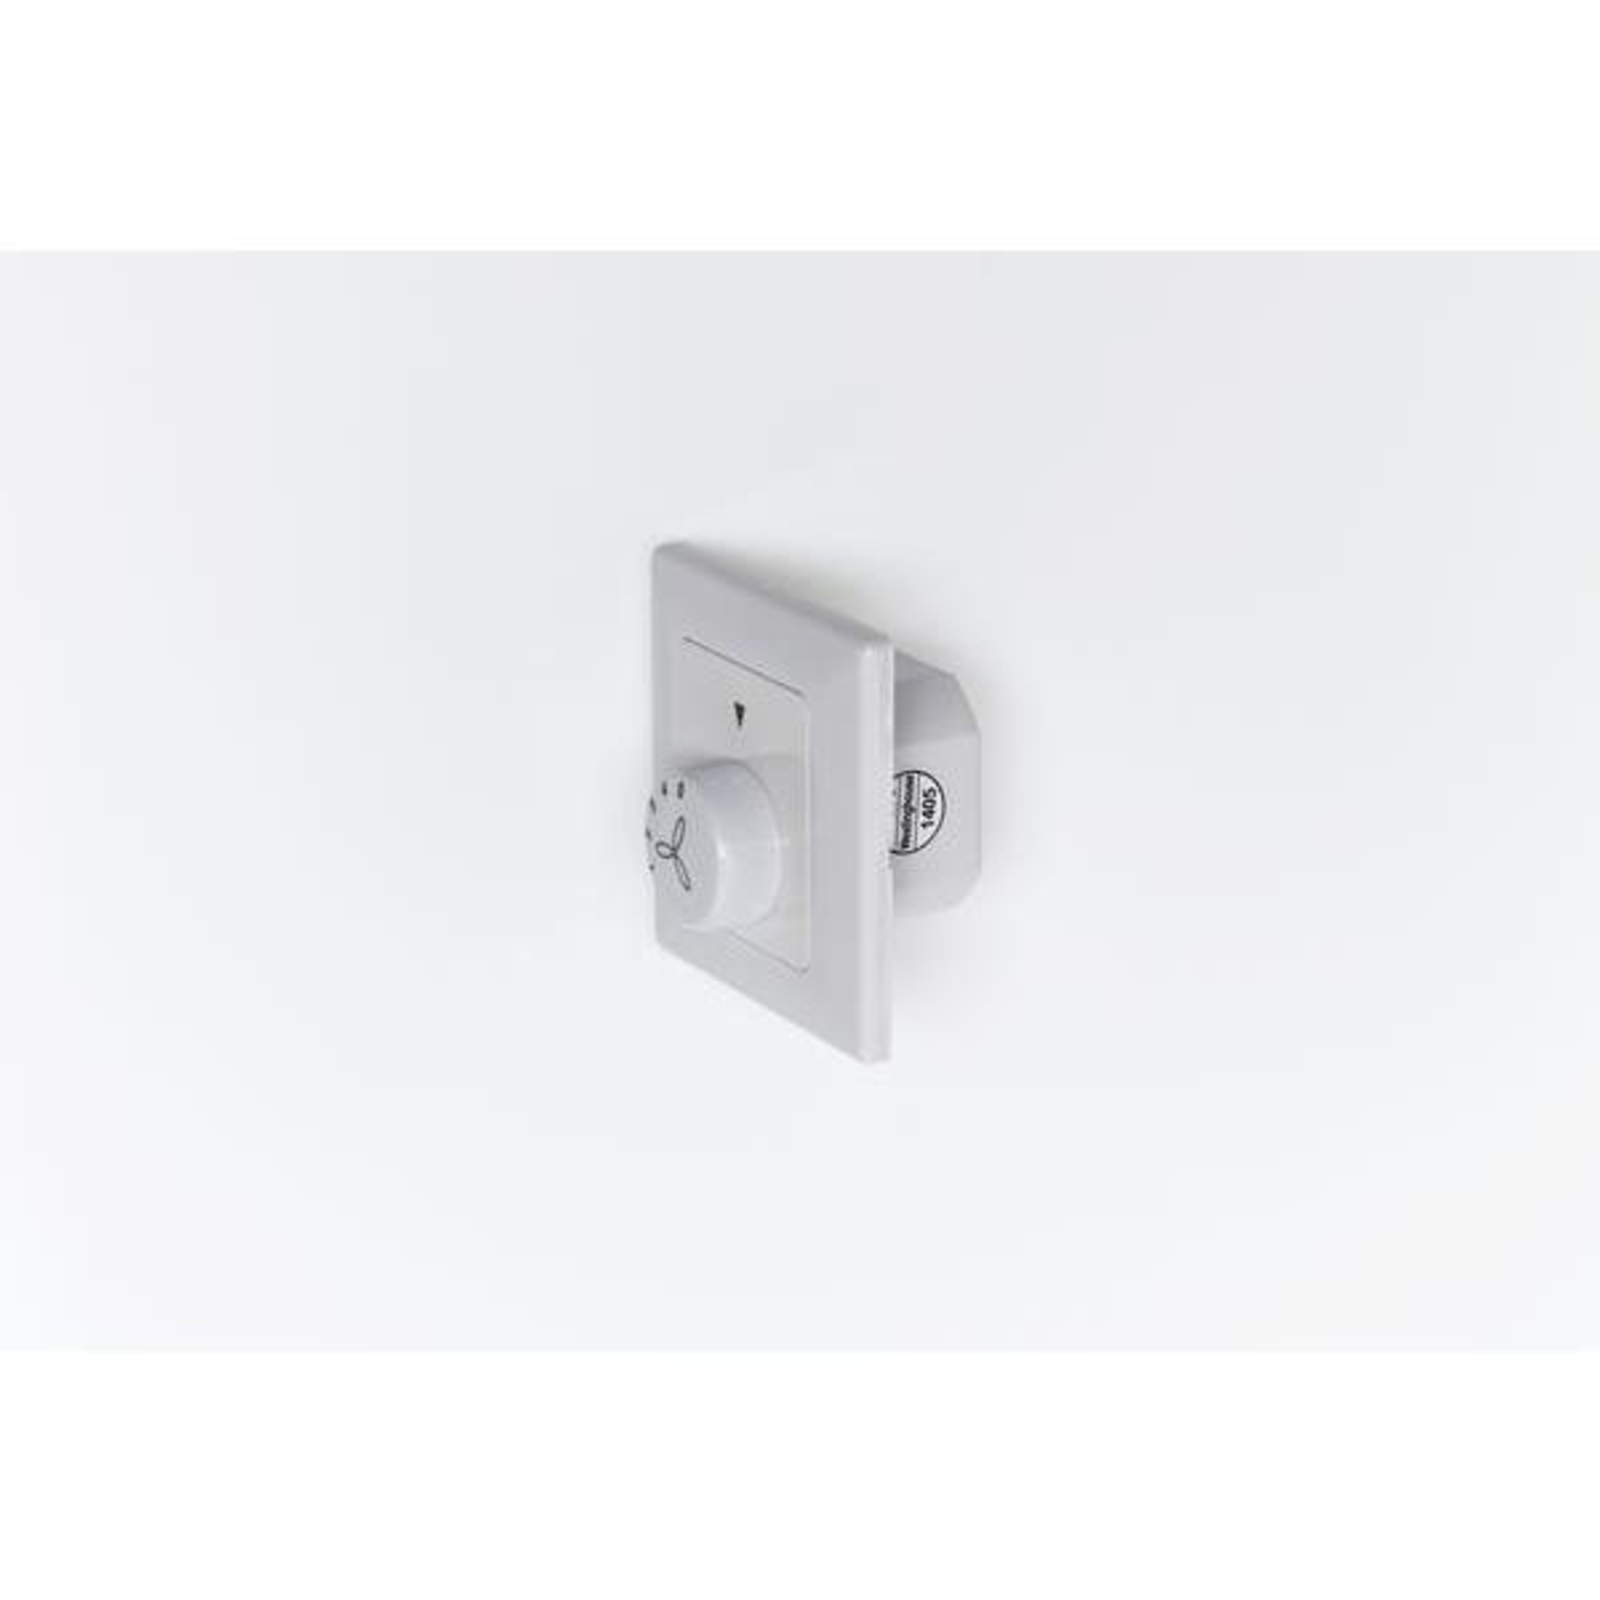 Westinghouse wall switch fans, 4 levels